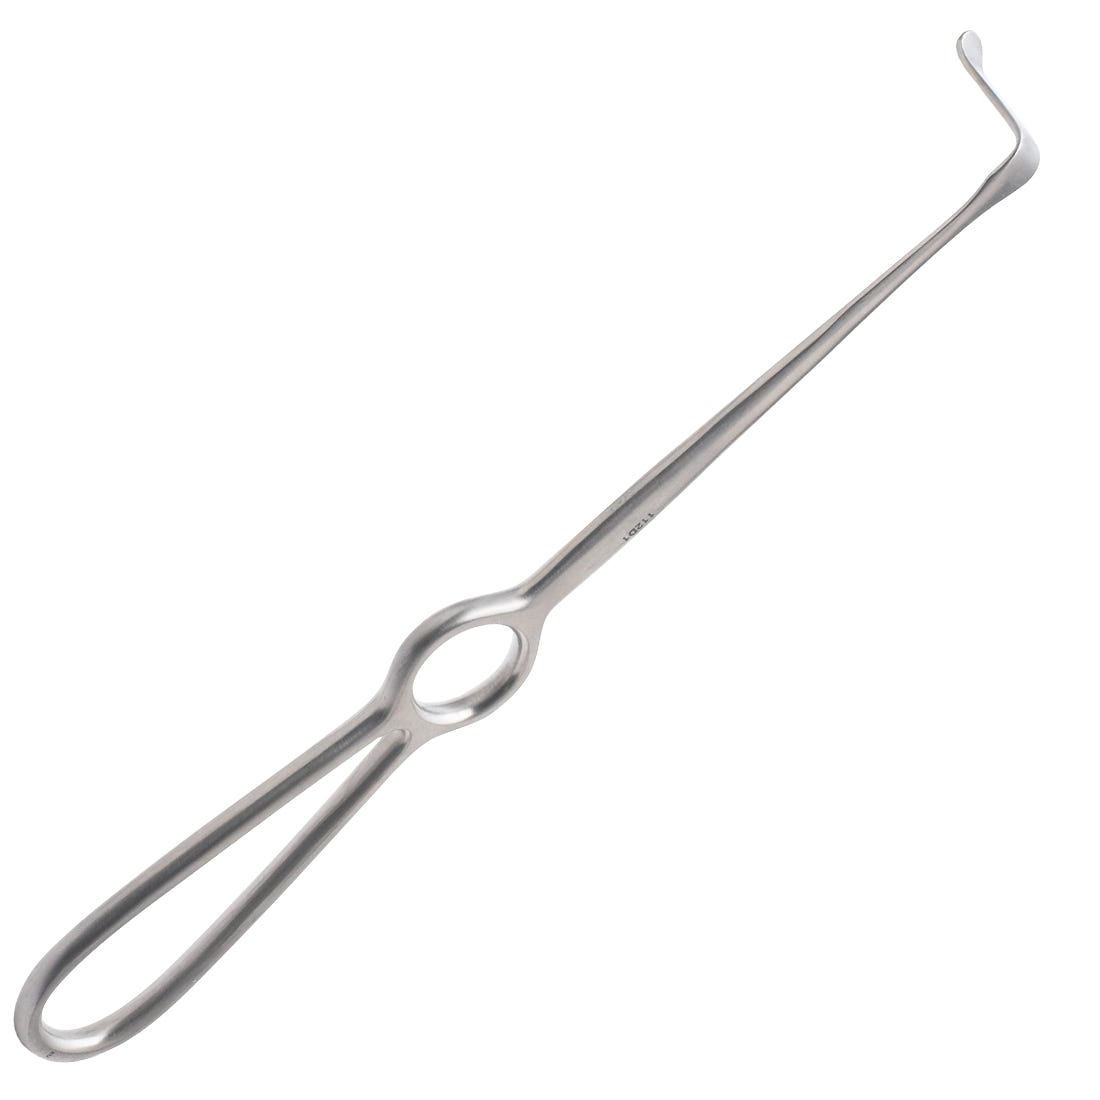 Obwegeser Type Surgical Retractor Standard, Curved Up, 7mm x 25mm